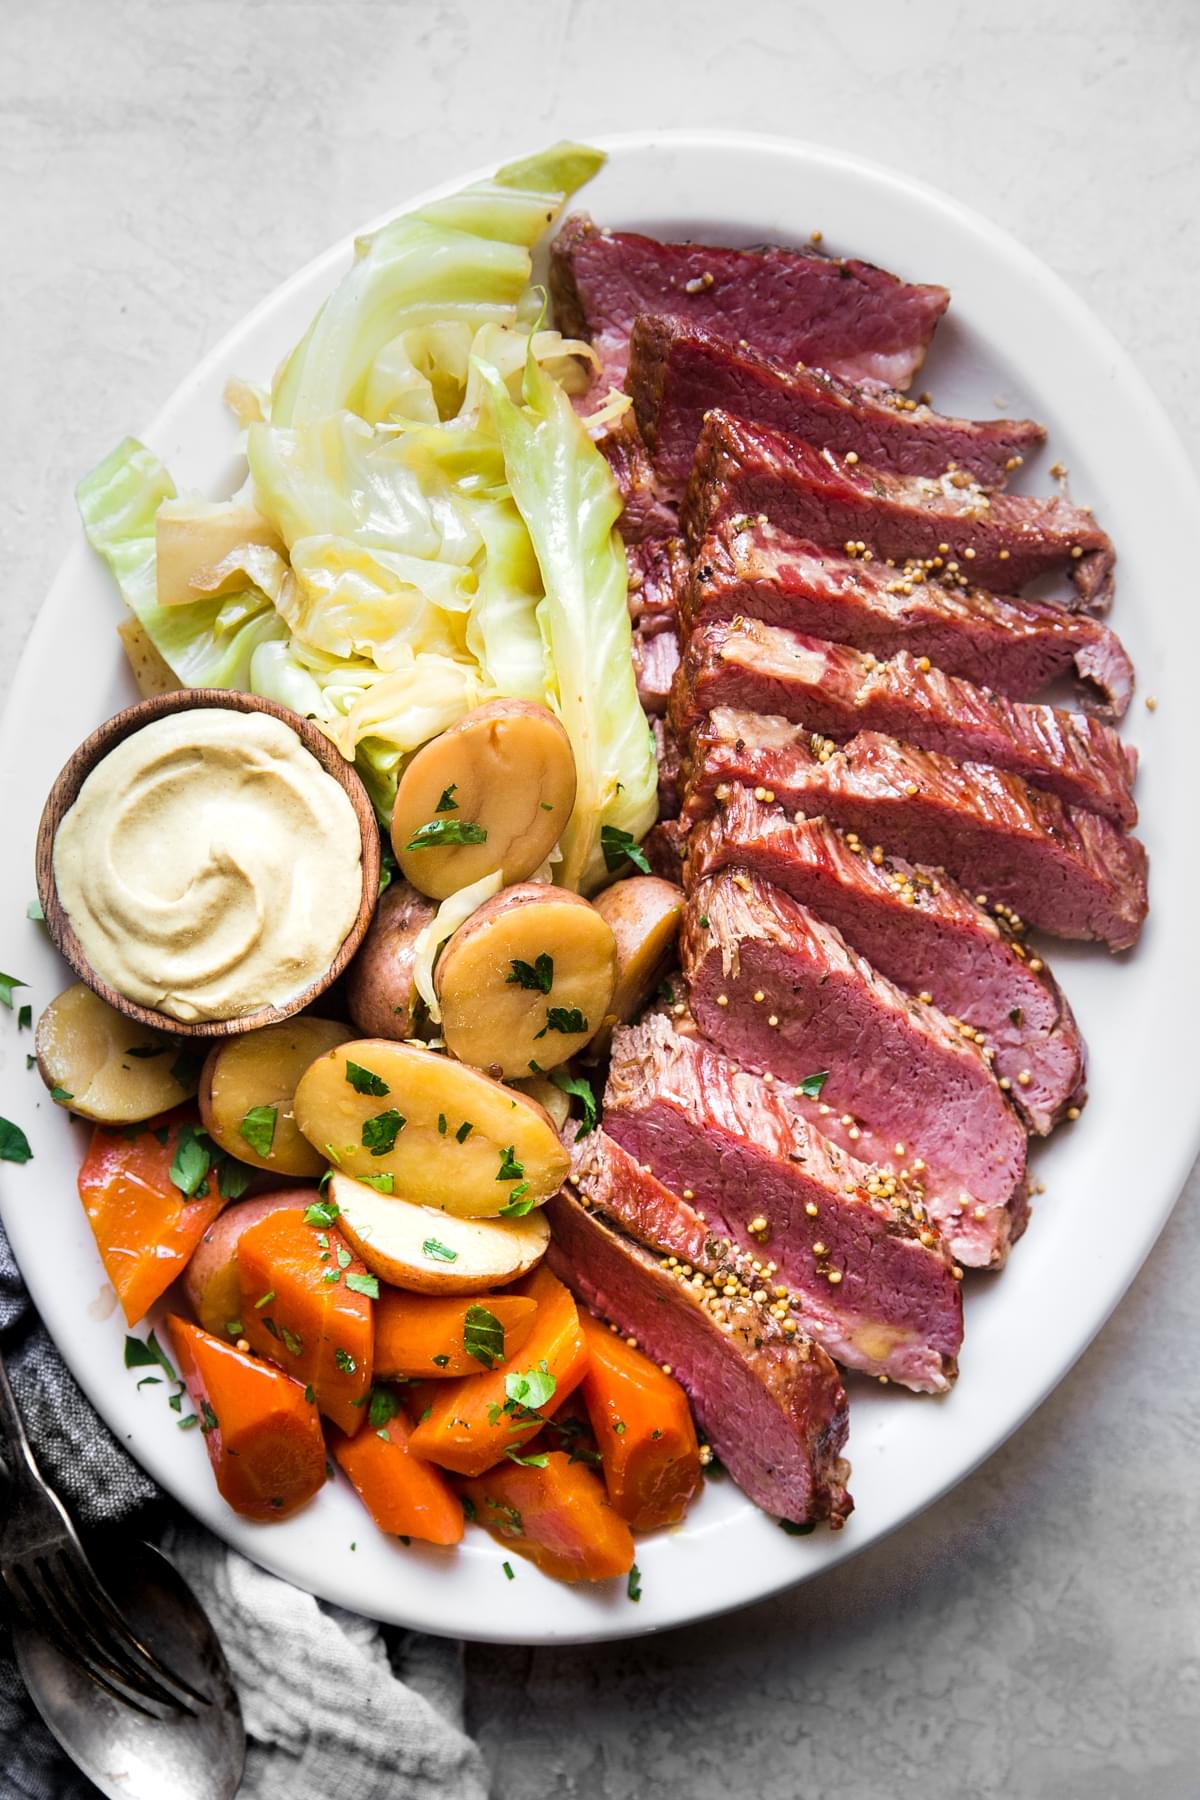 sliced Corned beef with cabbage and potatoes on a plate